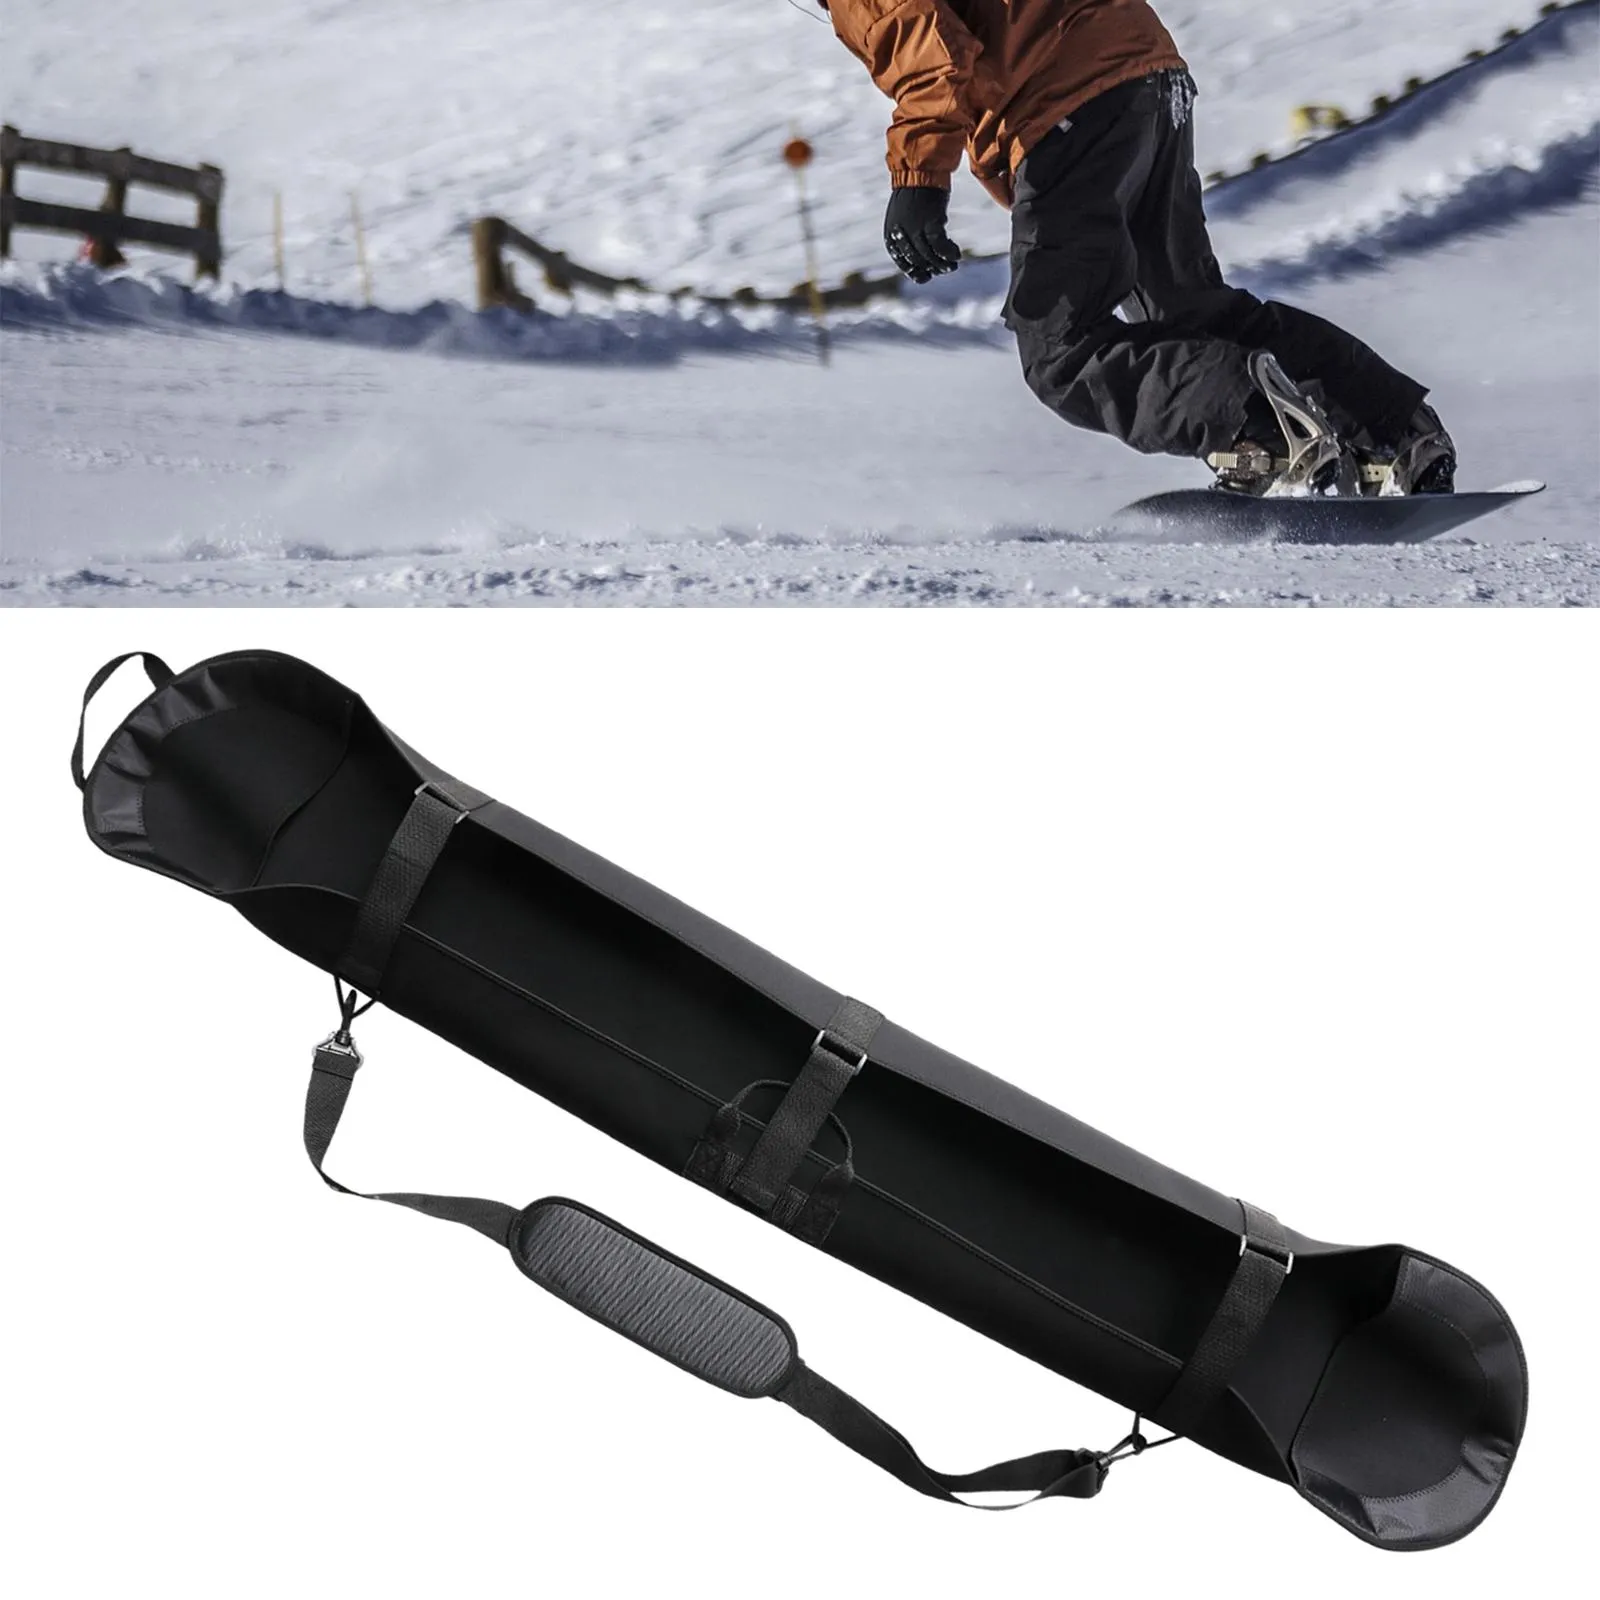 Snowboard Bag Snowboard Gear Bag Lightweight Practical Protective Snowboard Sleeve Snowboard Cover for Winter Sports Skating